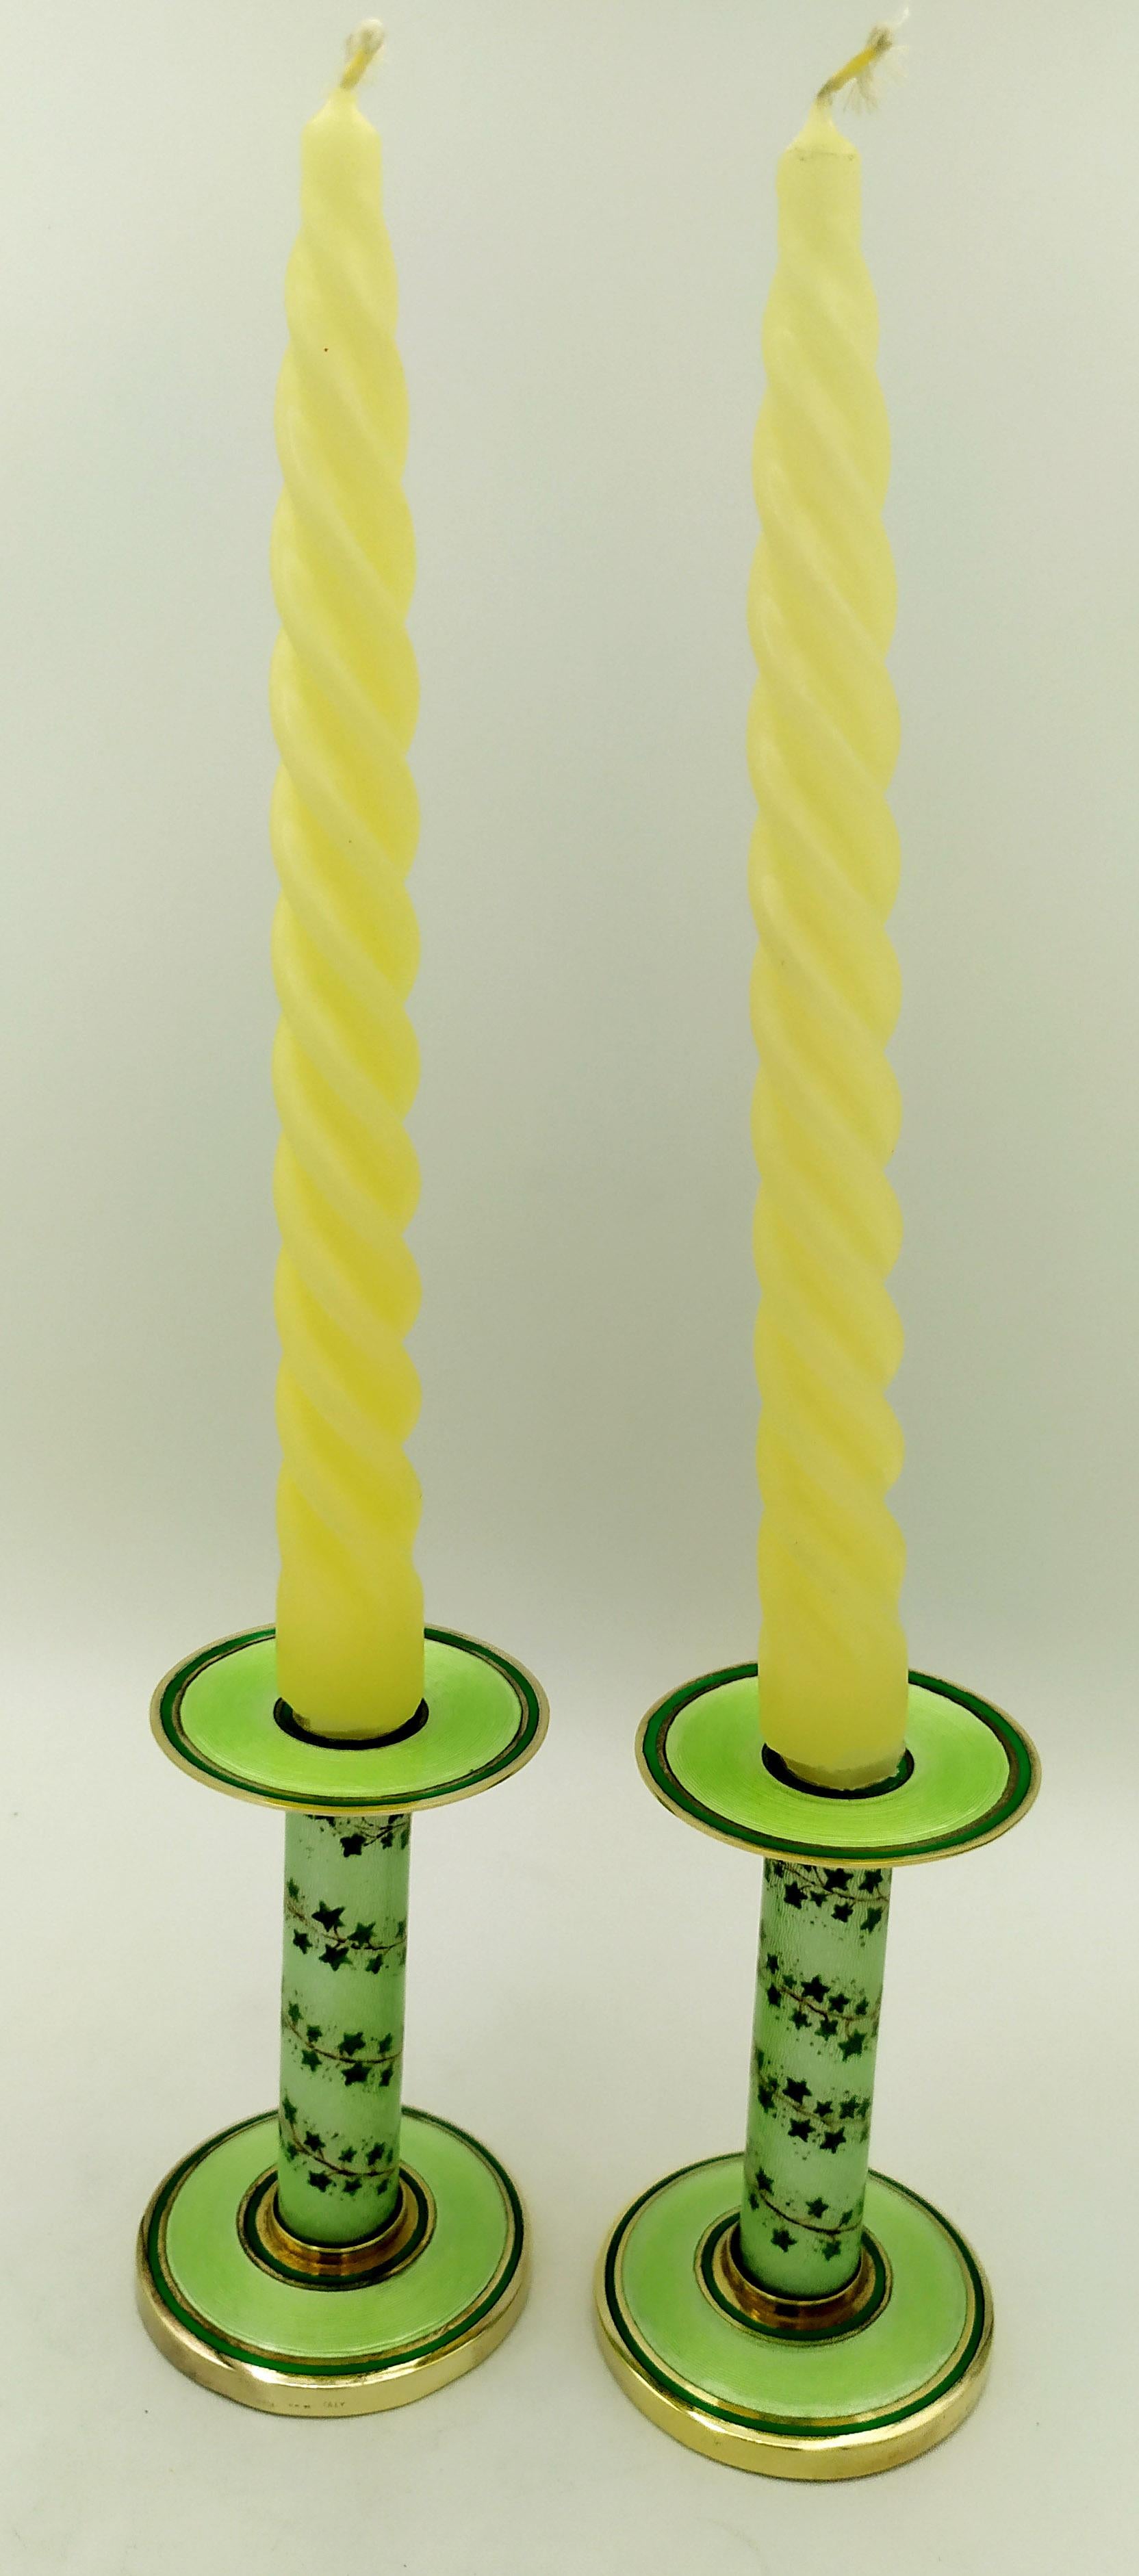 Pair of Candlesticks light Green Enamel and hand painted ivy on Sterling Silver Salimbeni
Pair of gold-plated 925/1000 sterling silver candlesticks with translucent fired enamels on guillochè and fine hand-painted miniature of floral shoots wrapped